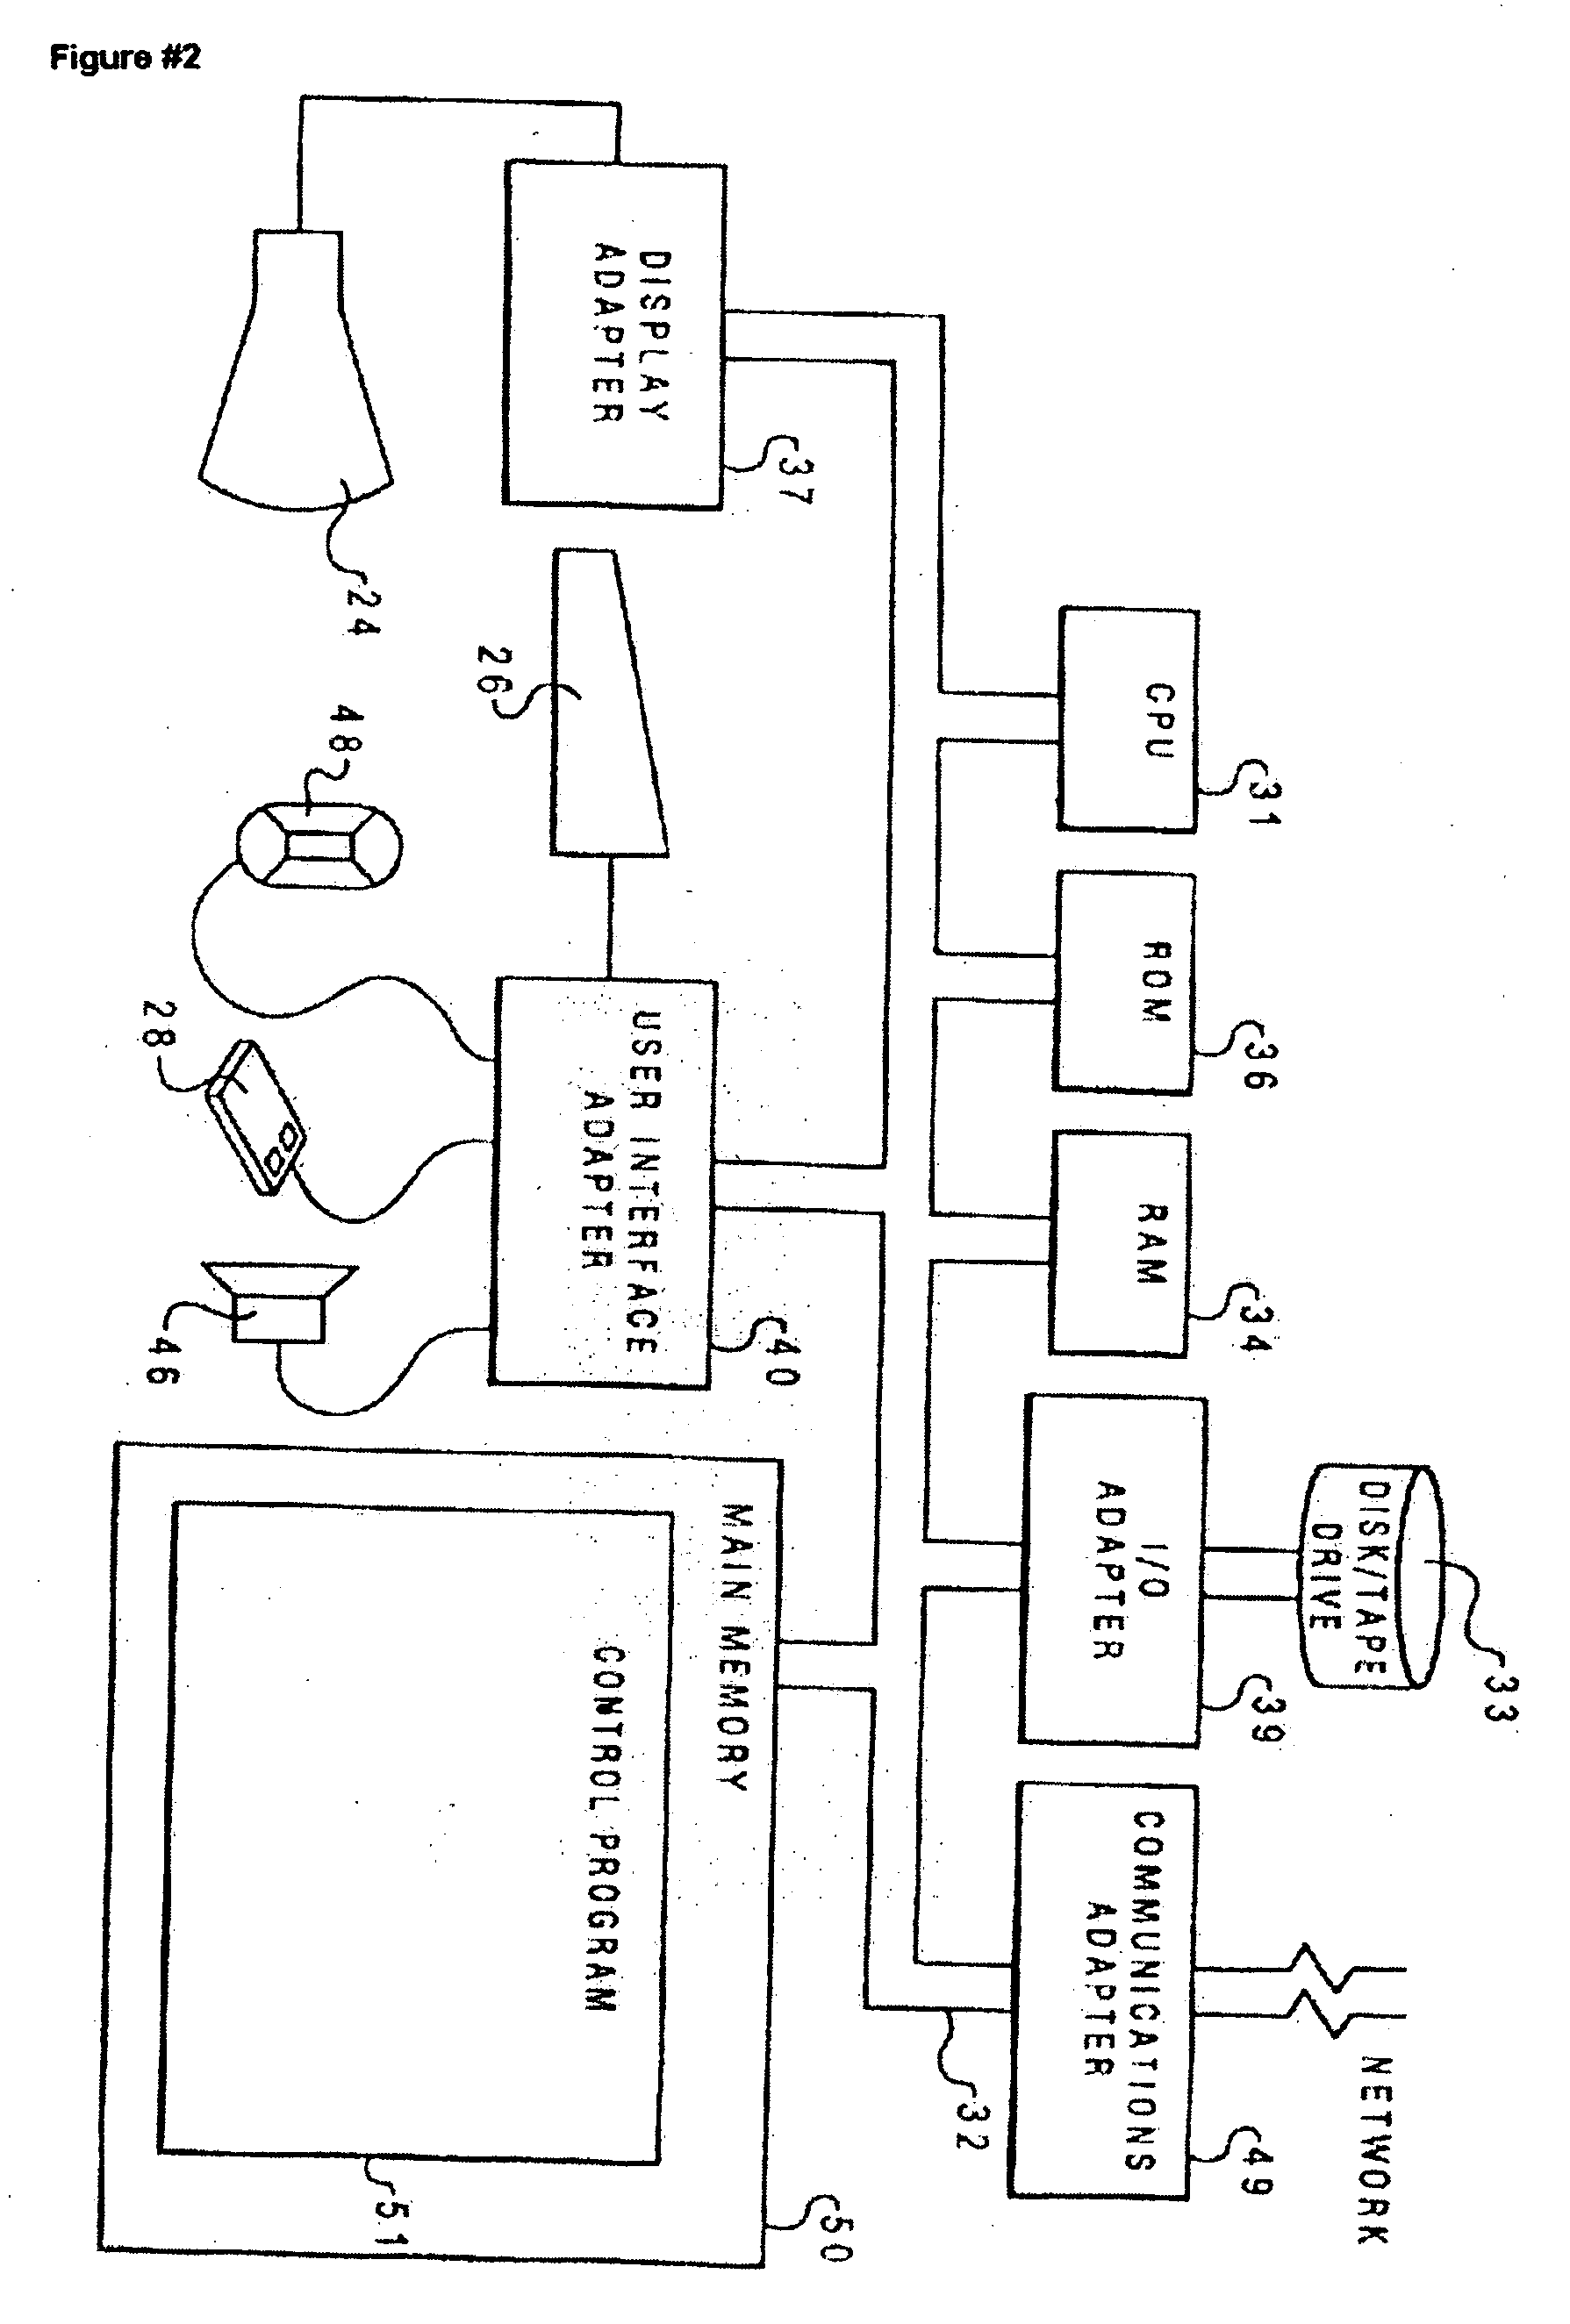 System and method for the cross-platform transmission of messages